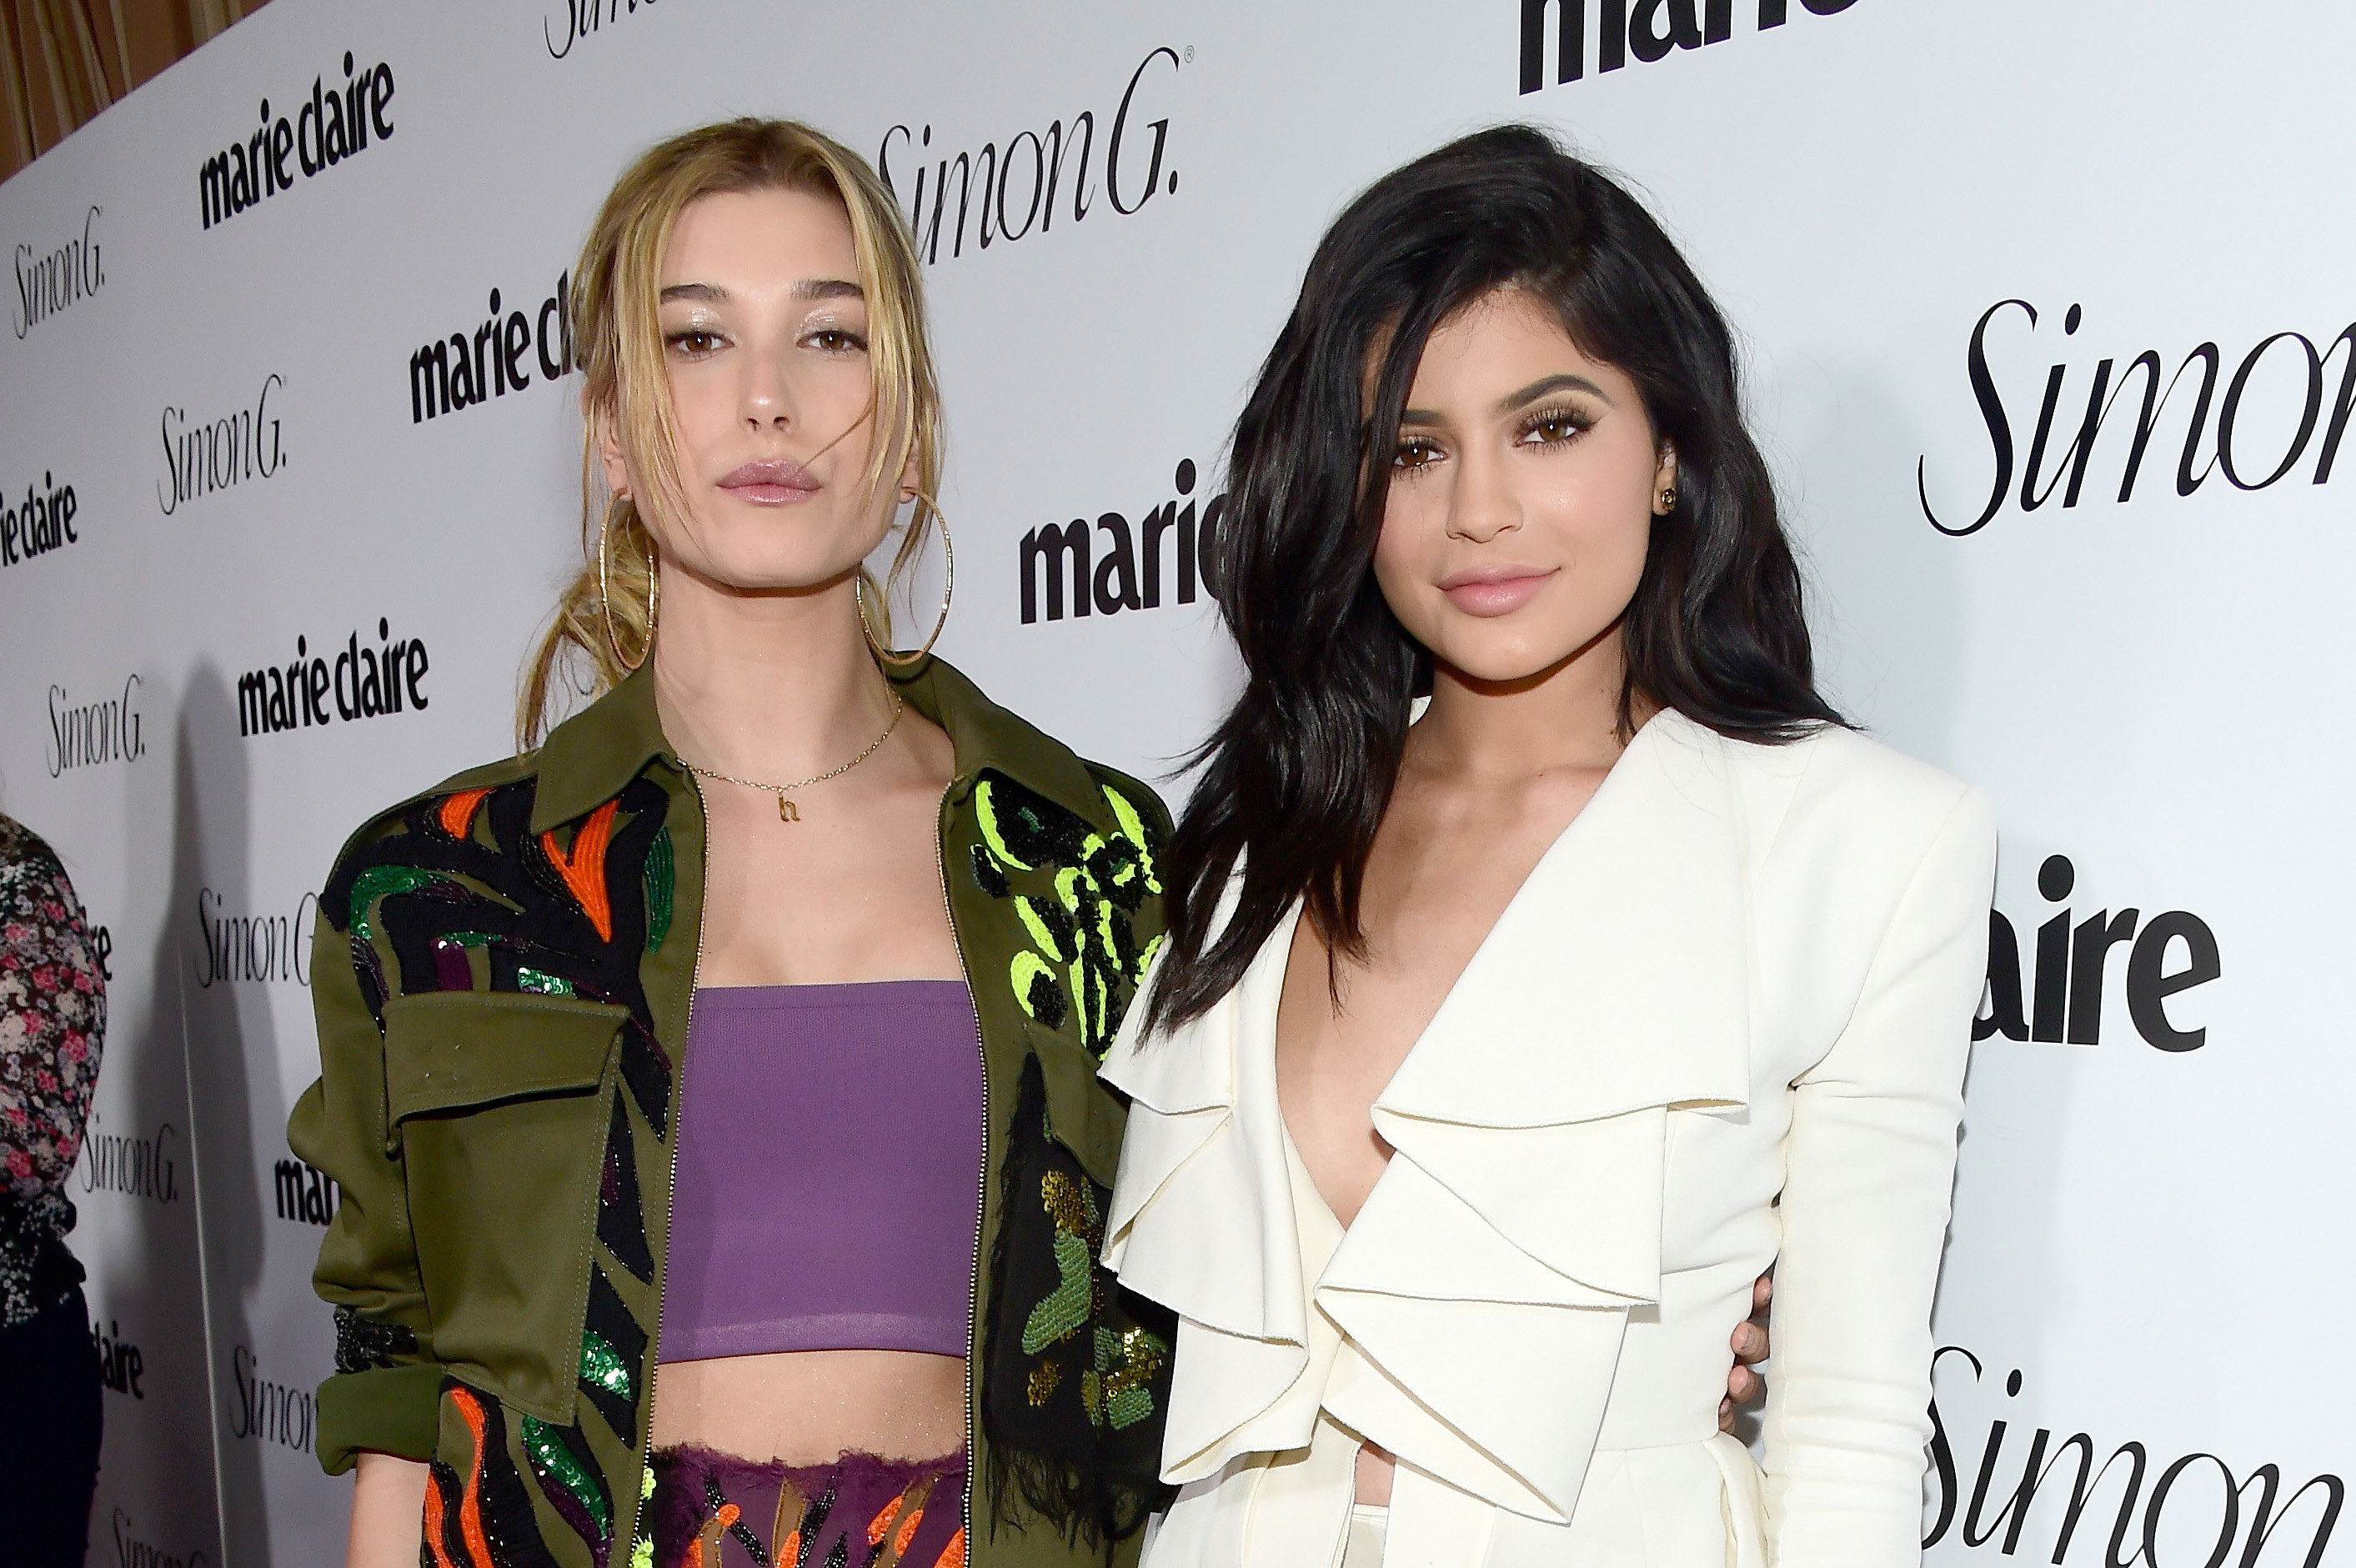 Hailey and Kylie with their arms around each other as they have their photo taken on the red carpet